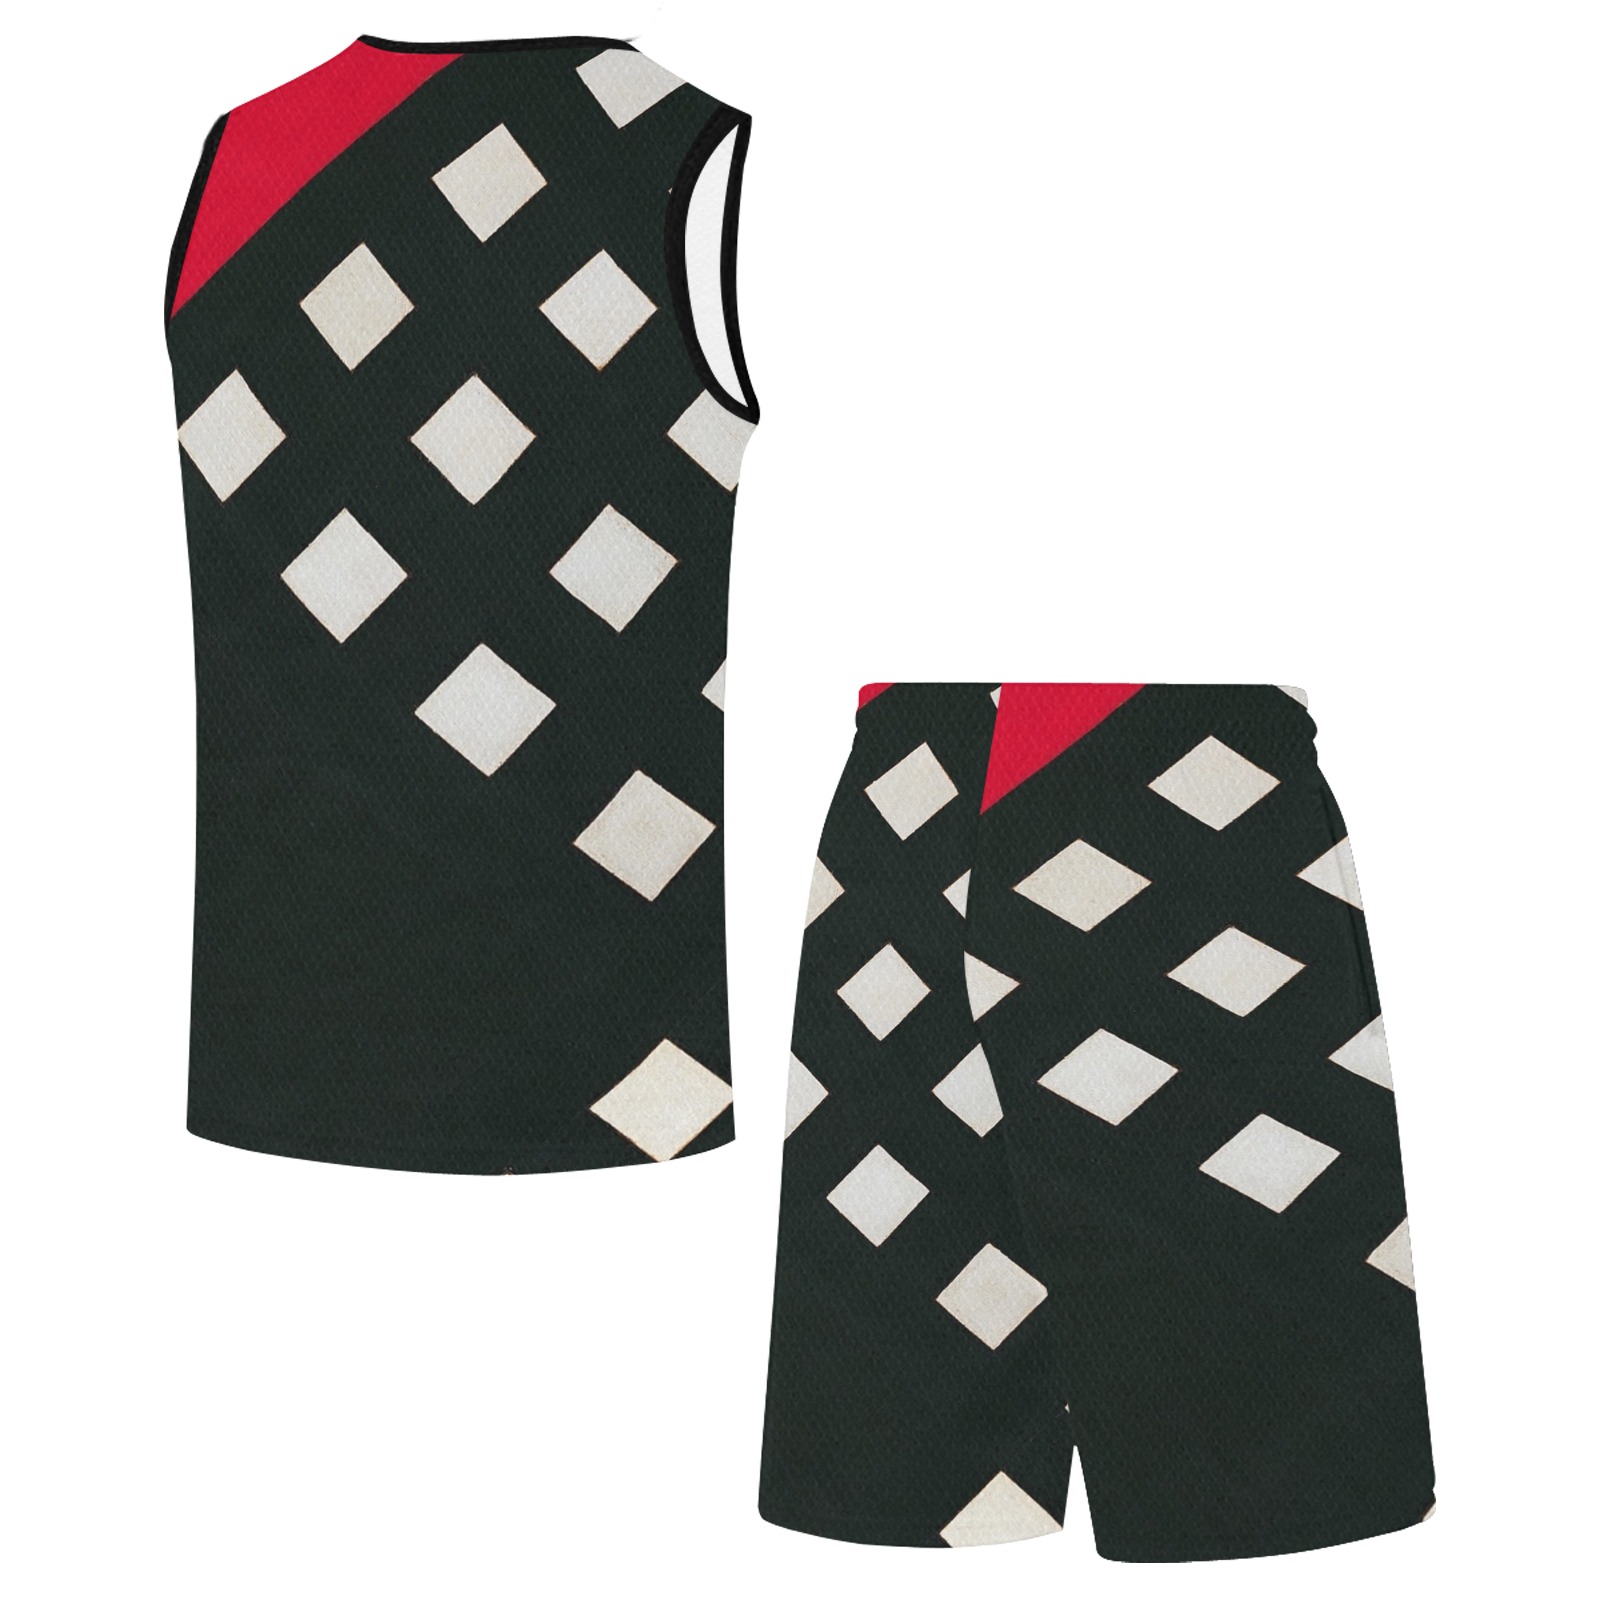 Counter-composition XV by Theo van Doesburg- Basketball Uniform with Pocket